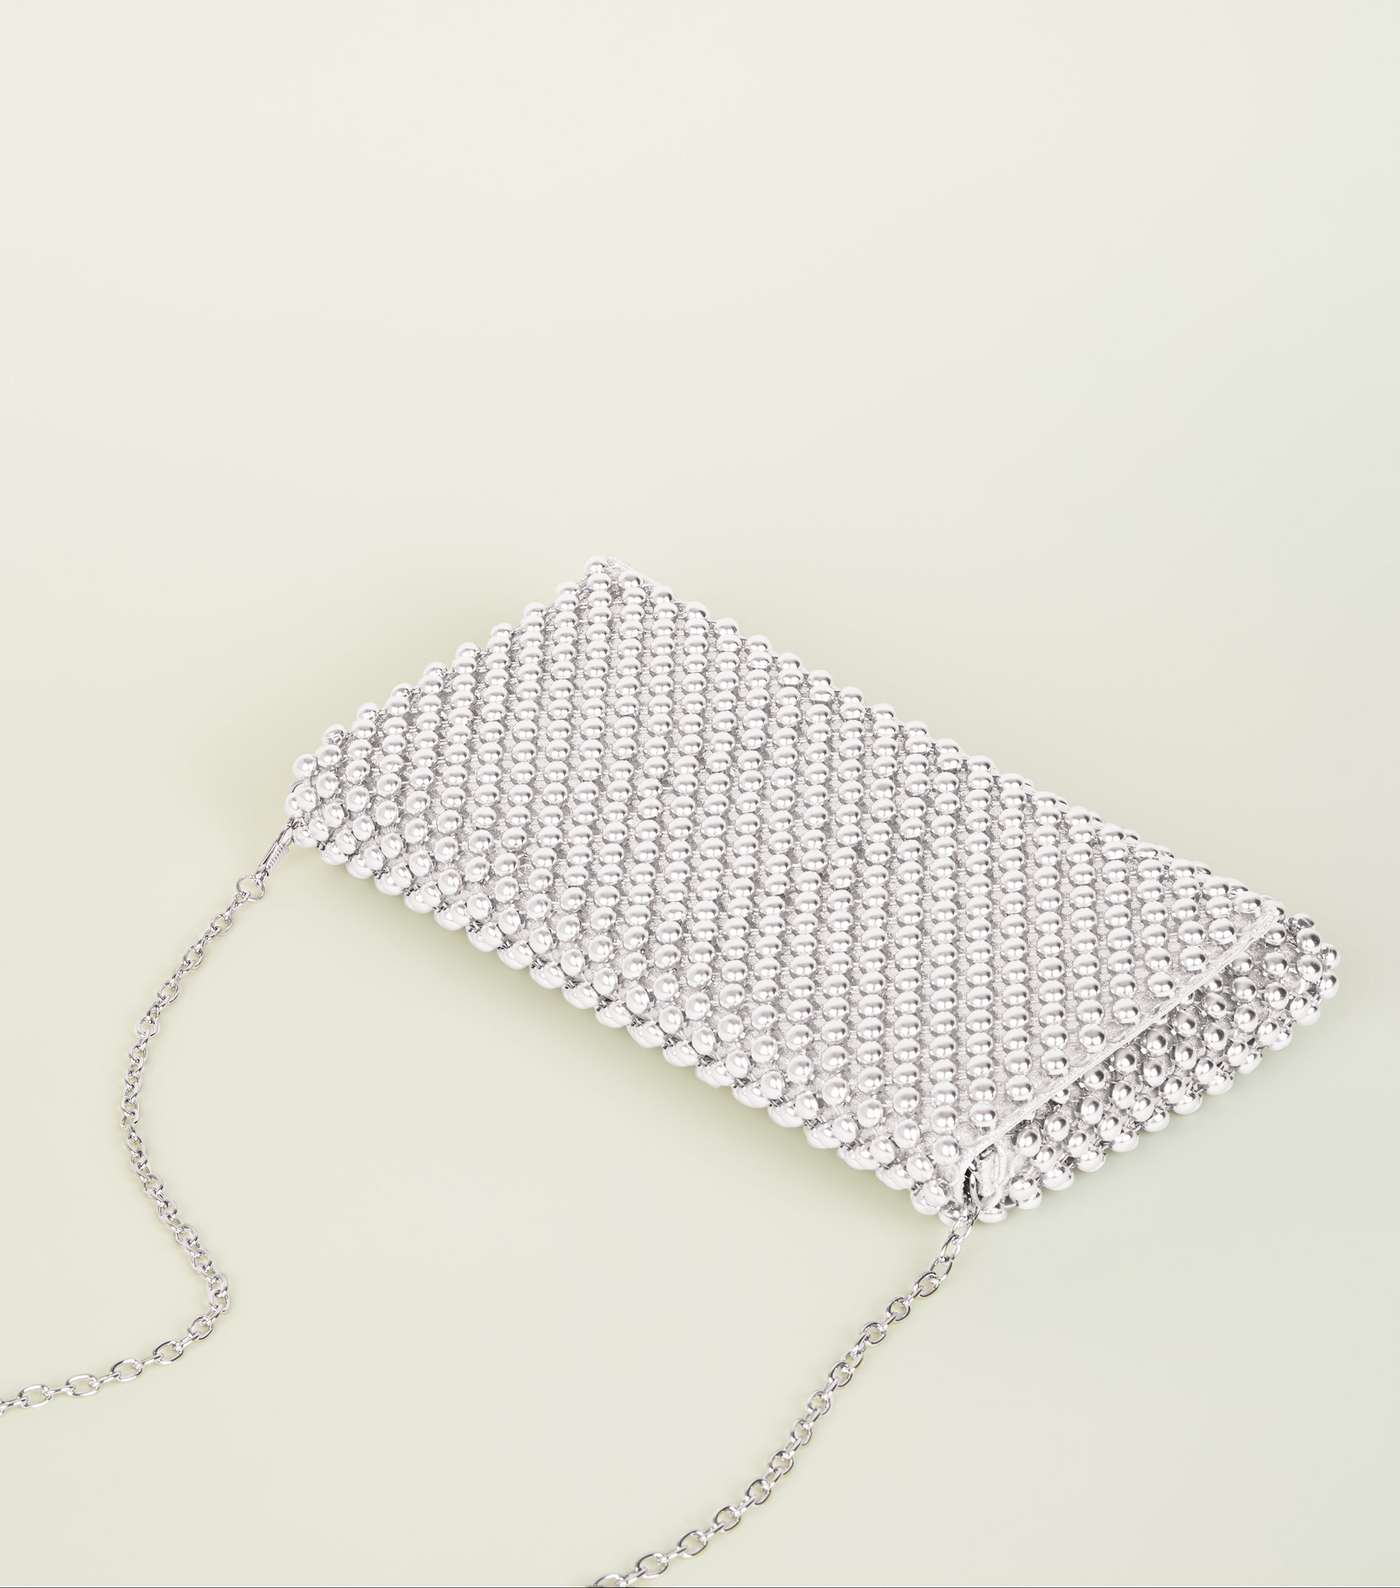 Silver Beaded Foldover Clutch Bag Image 3